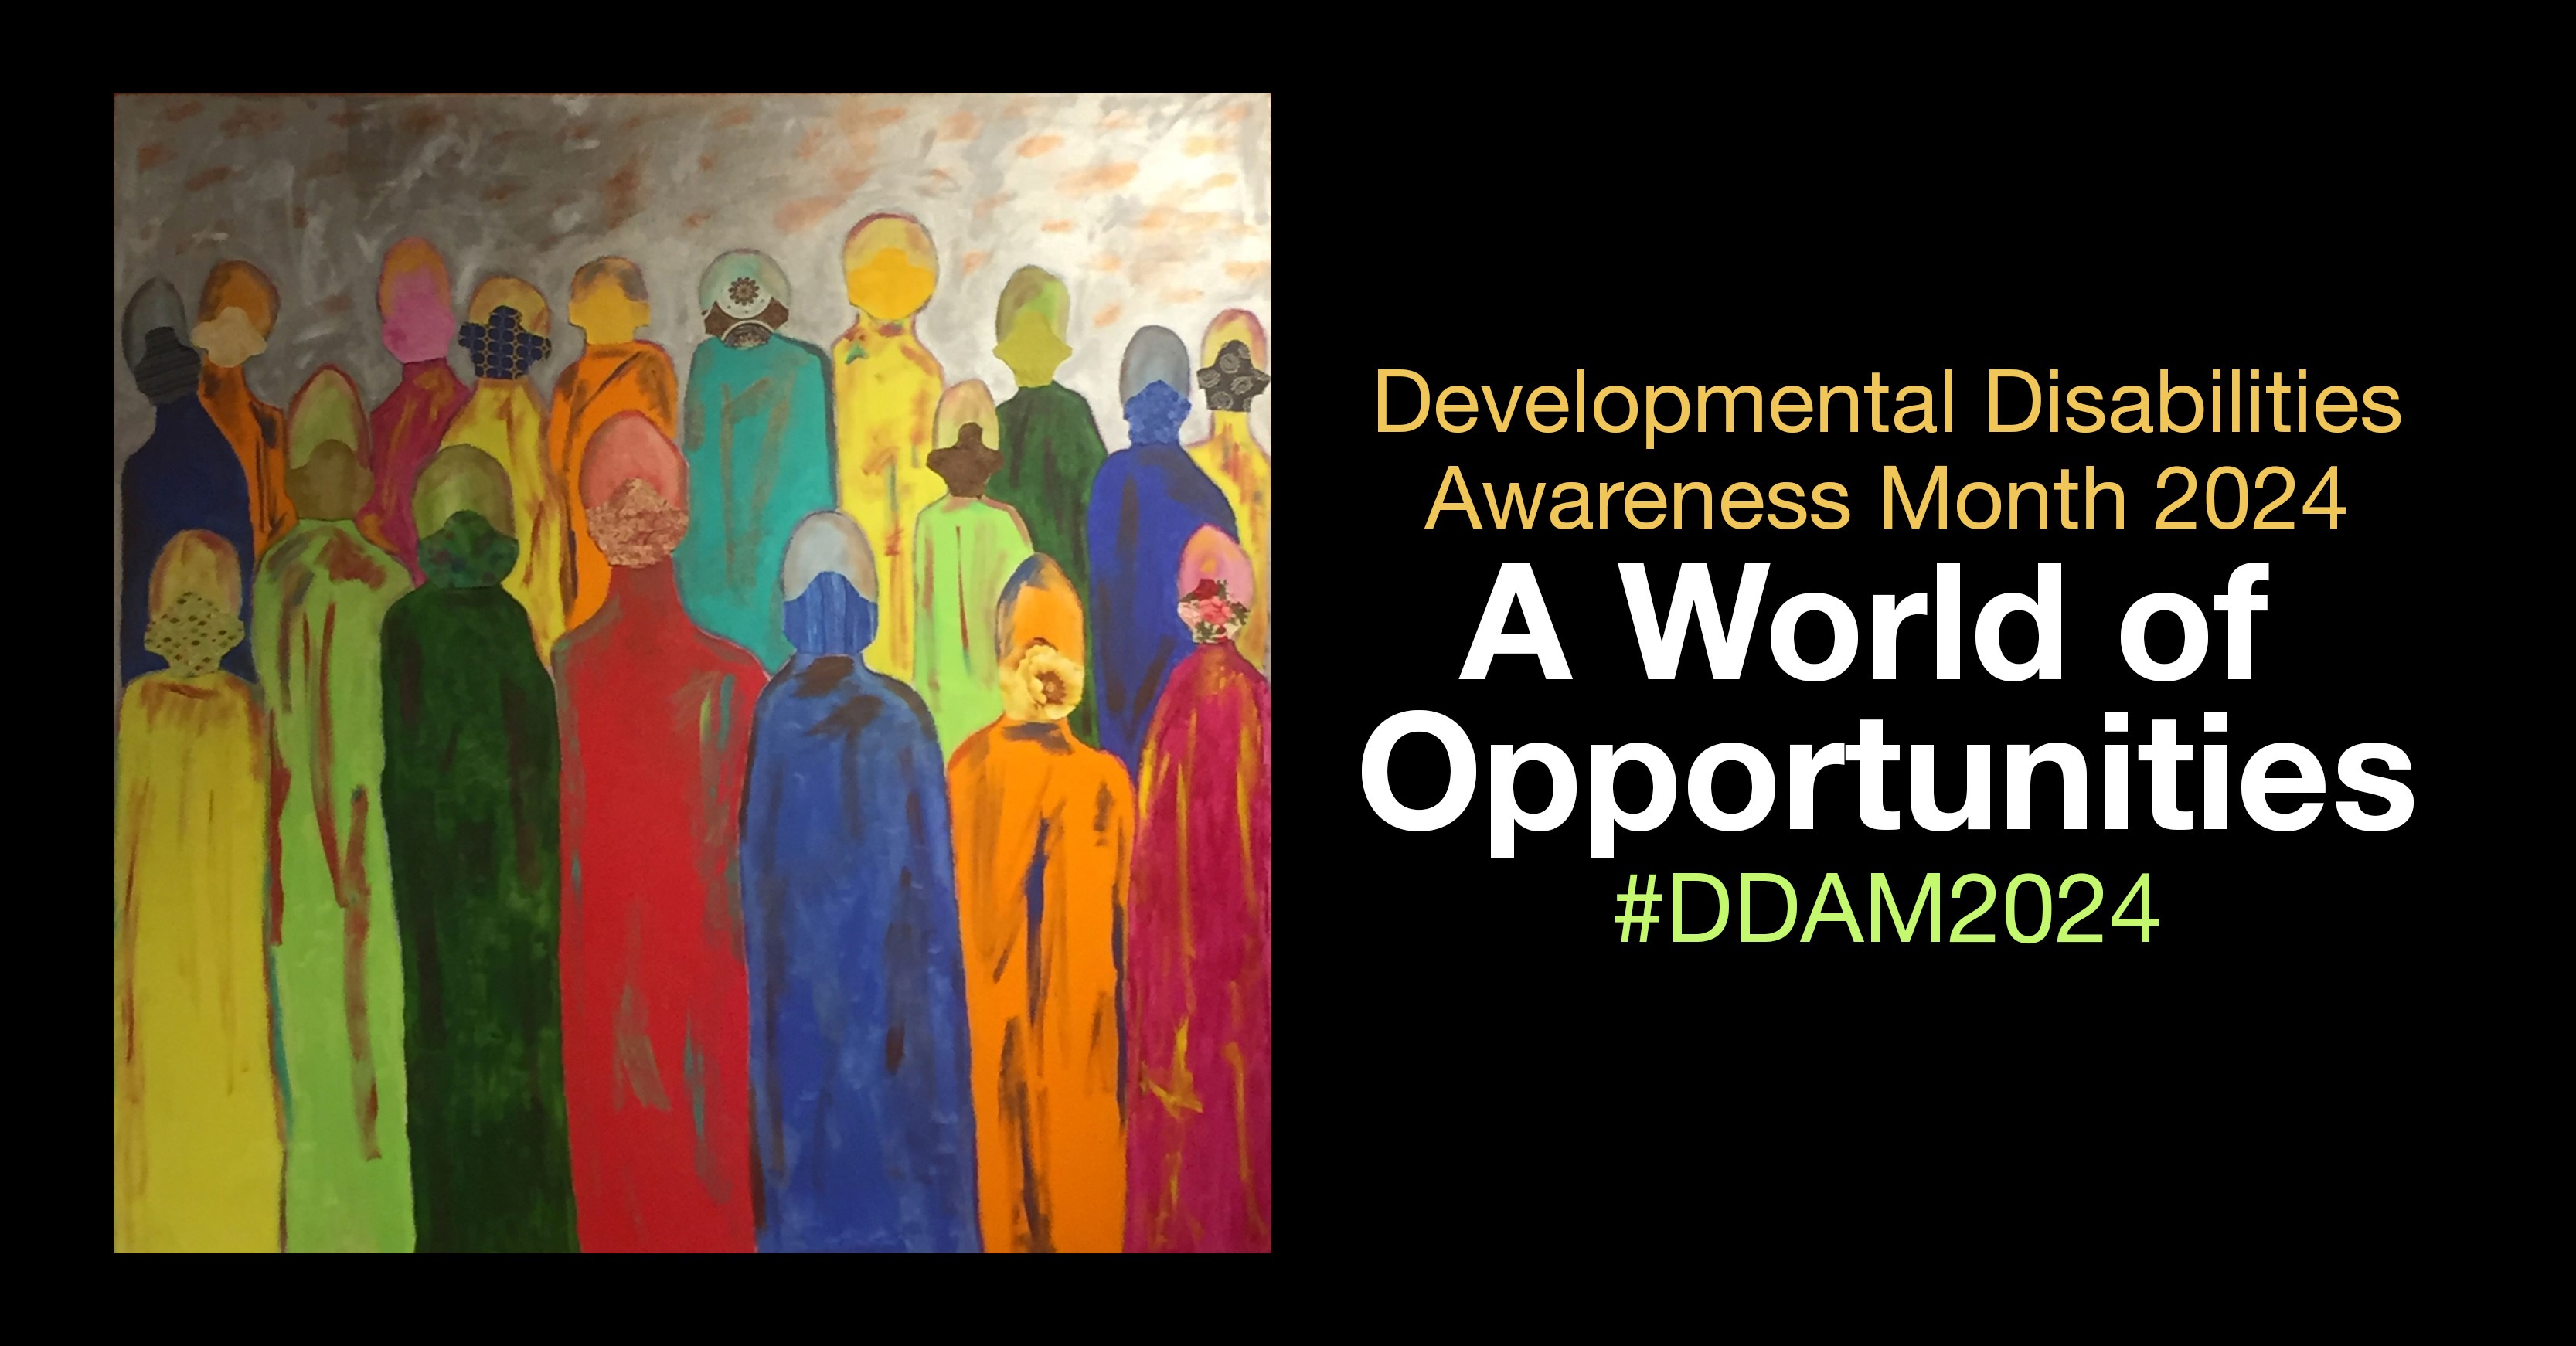 Observance artwork on black background with wording: Developmental Disabilities Awaresness Month 2024, A World of Opportunities. #DDAM2024